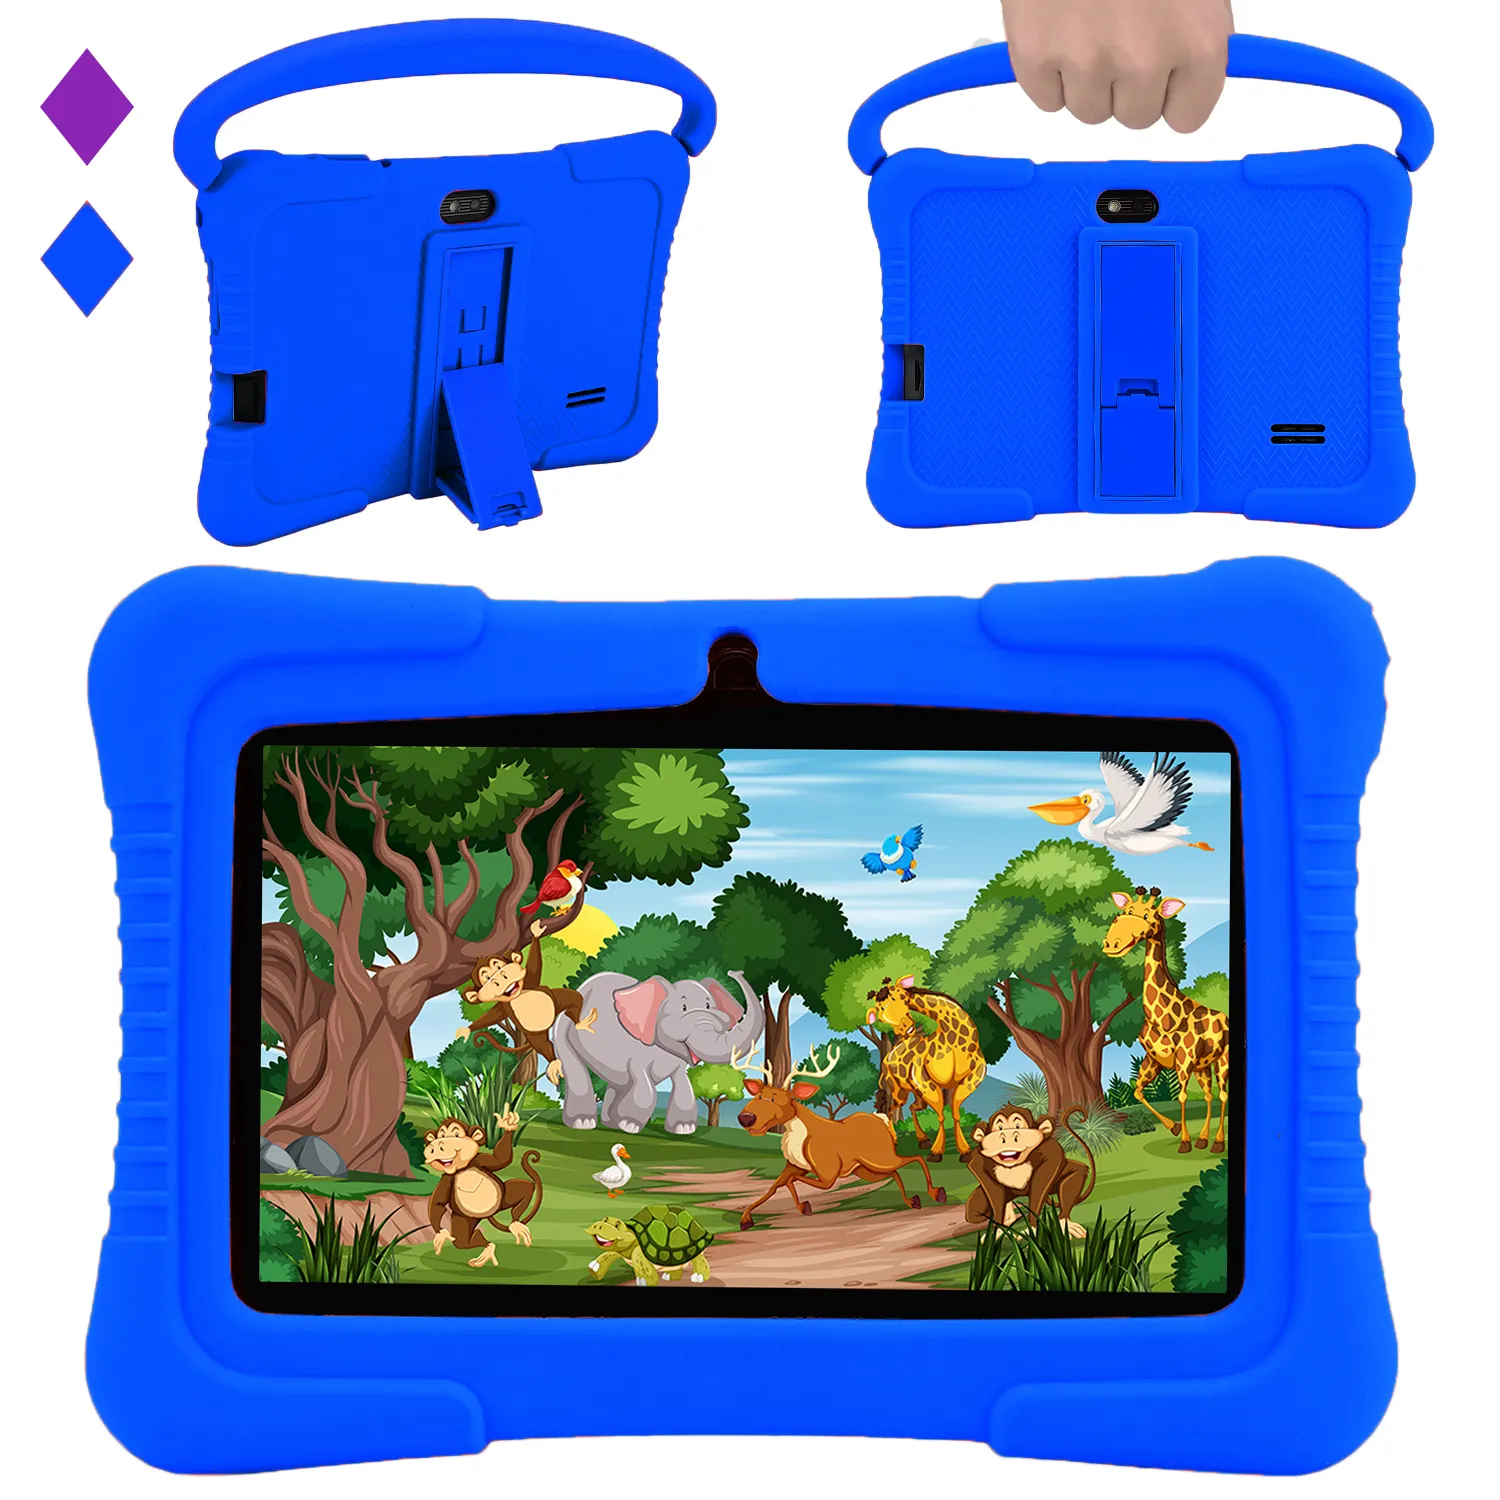 Veidoo Kids Tablet Pc 7 inch Android Tablet for Kids 2GB Ram 32GB Storage Toddler Tablet with IPS Screen Parent Control